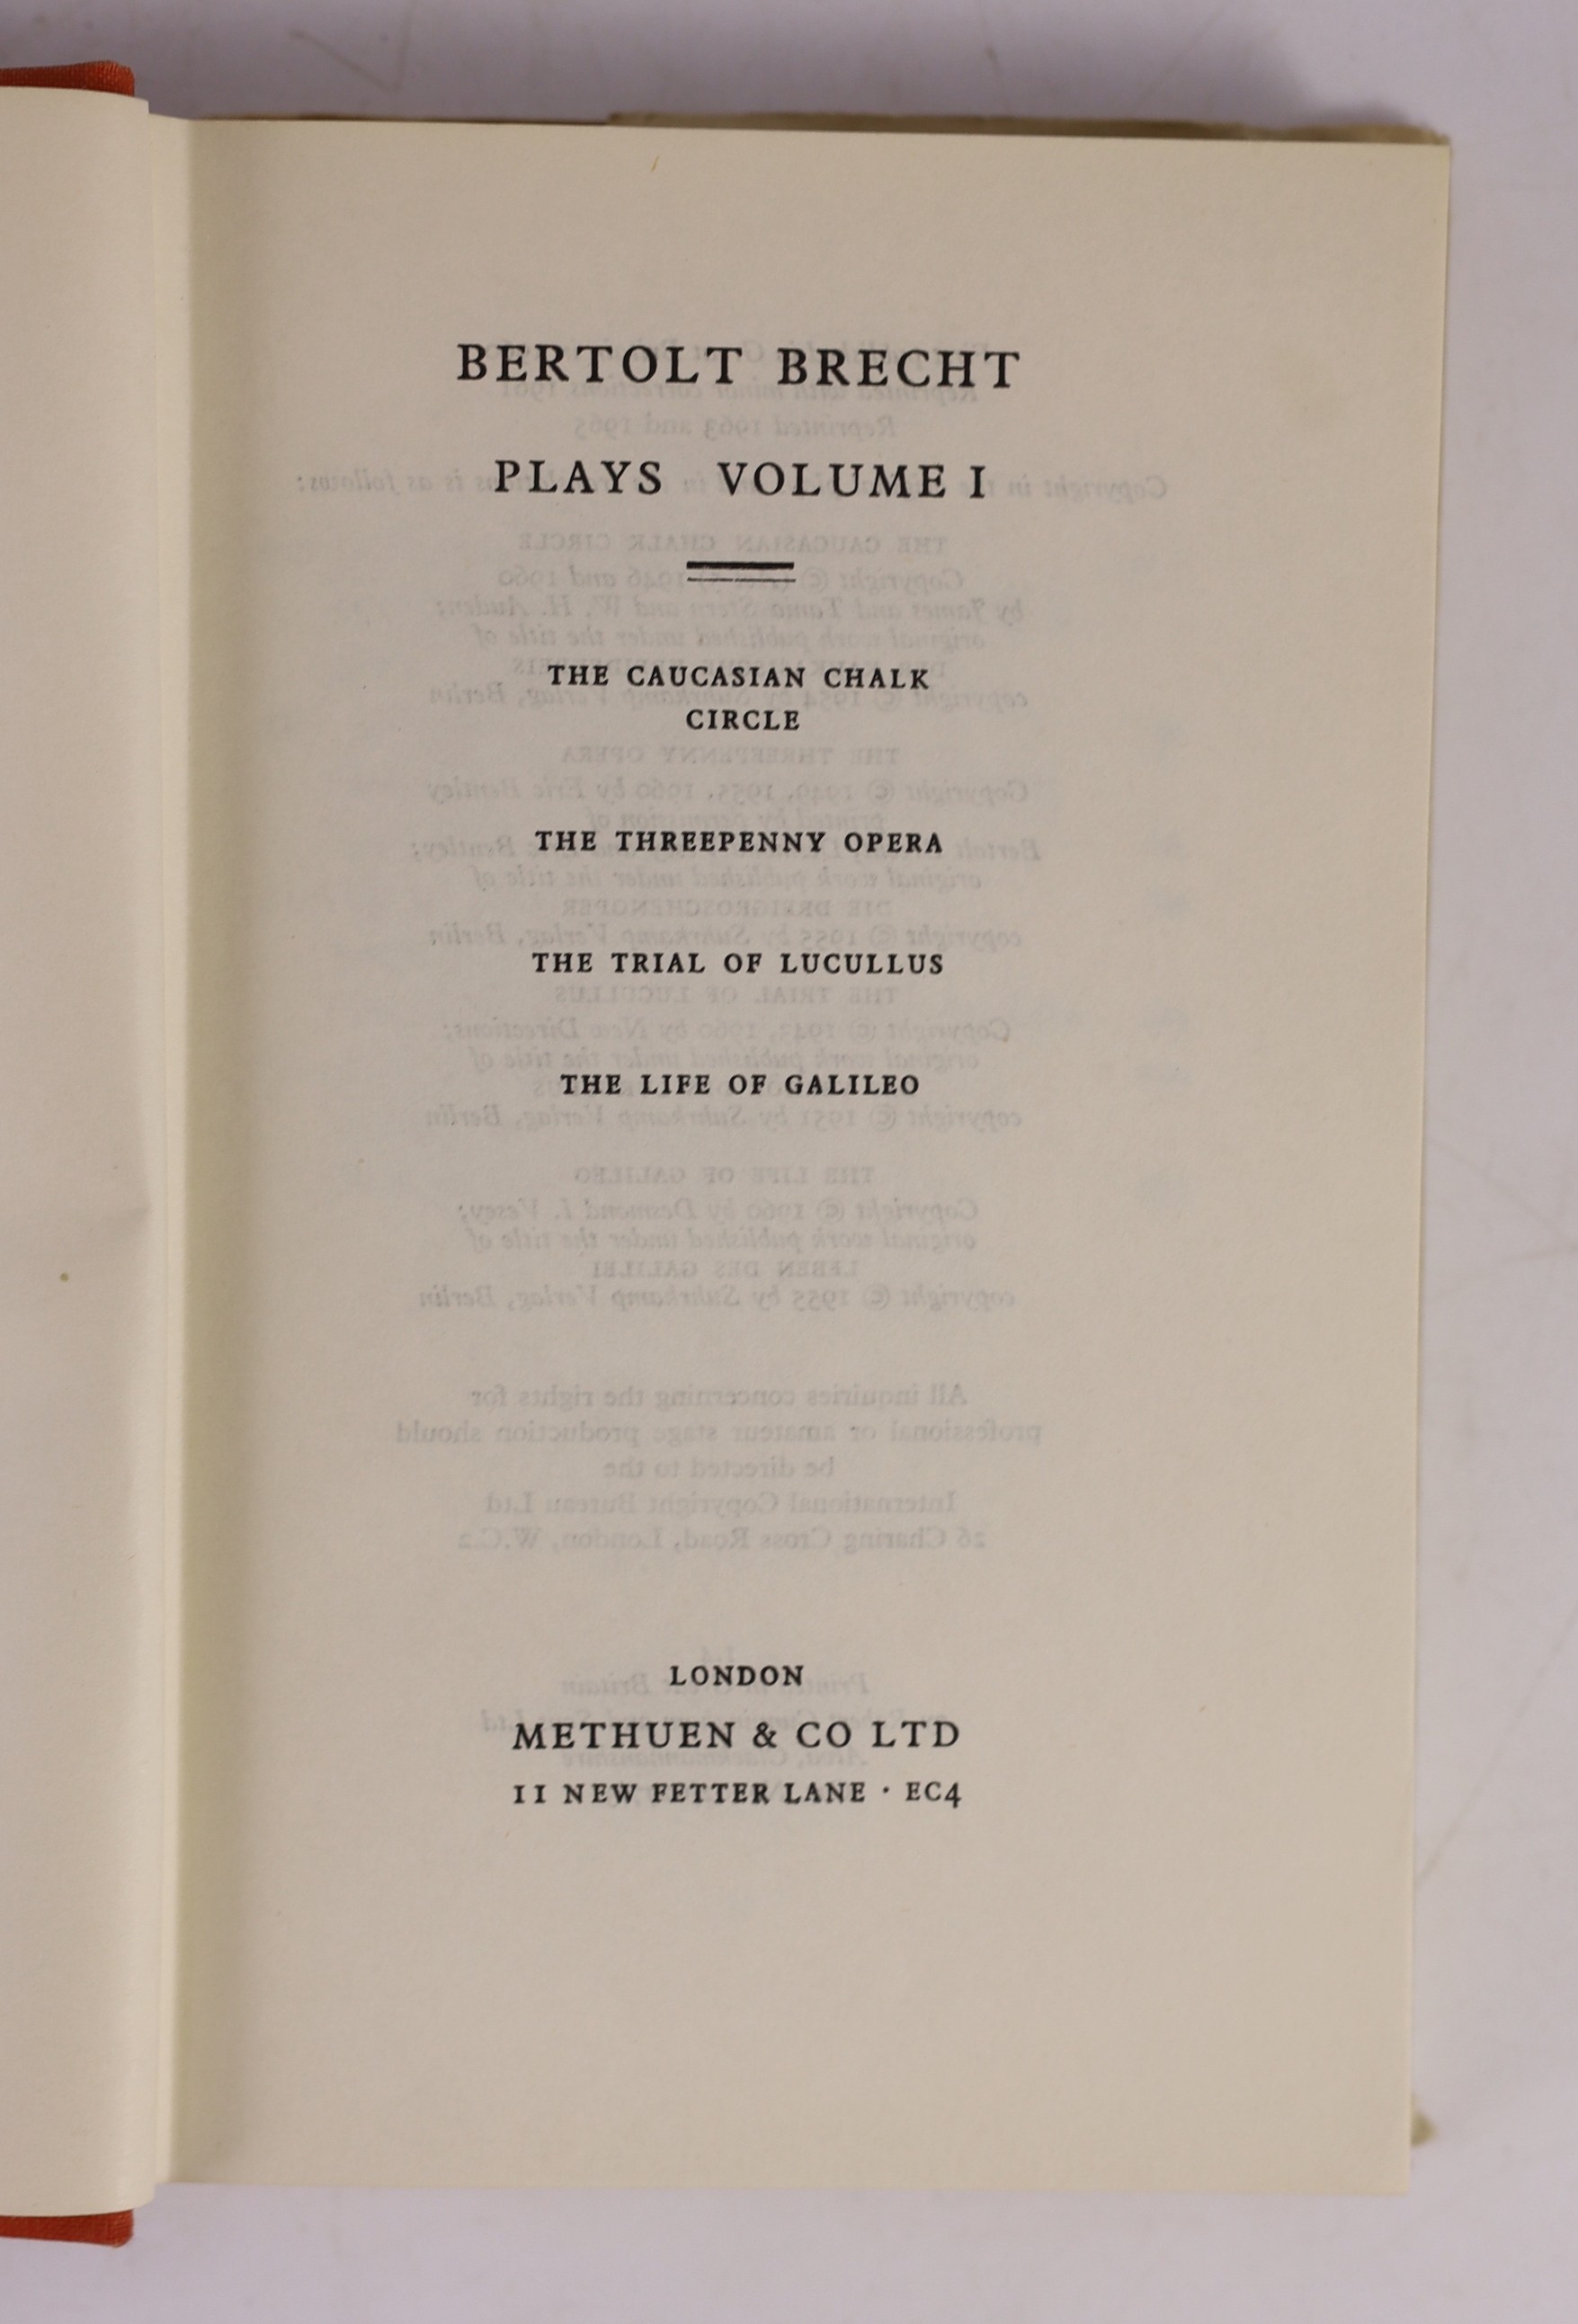 Brecht, Bertolt - Plays, vol. 1, 8vo, cloth with unclipped d/j, Glasgow, 1965 and Eliot, T.S - Murder in the Cathedral, 4th edition, 8vo, cloth with unclipped d/j, Faber and Faber, London, 1950 (2)